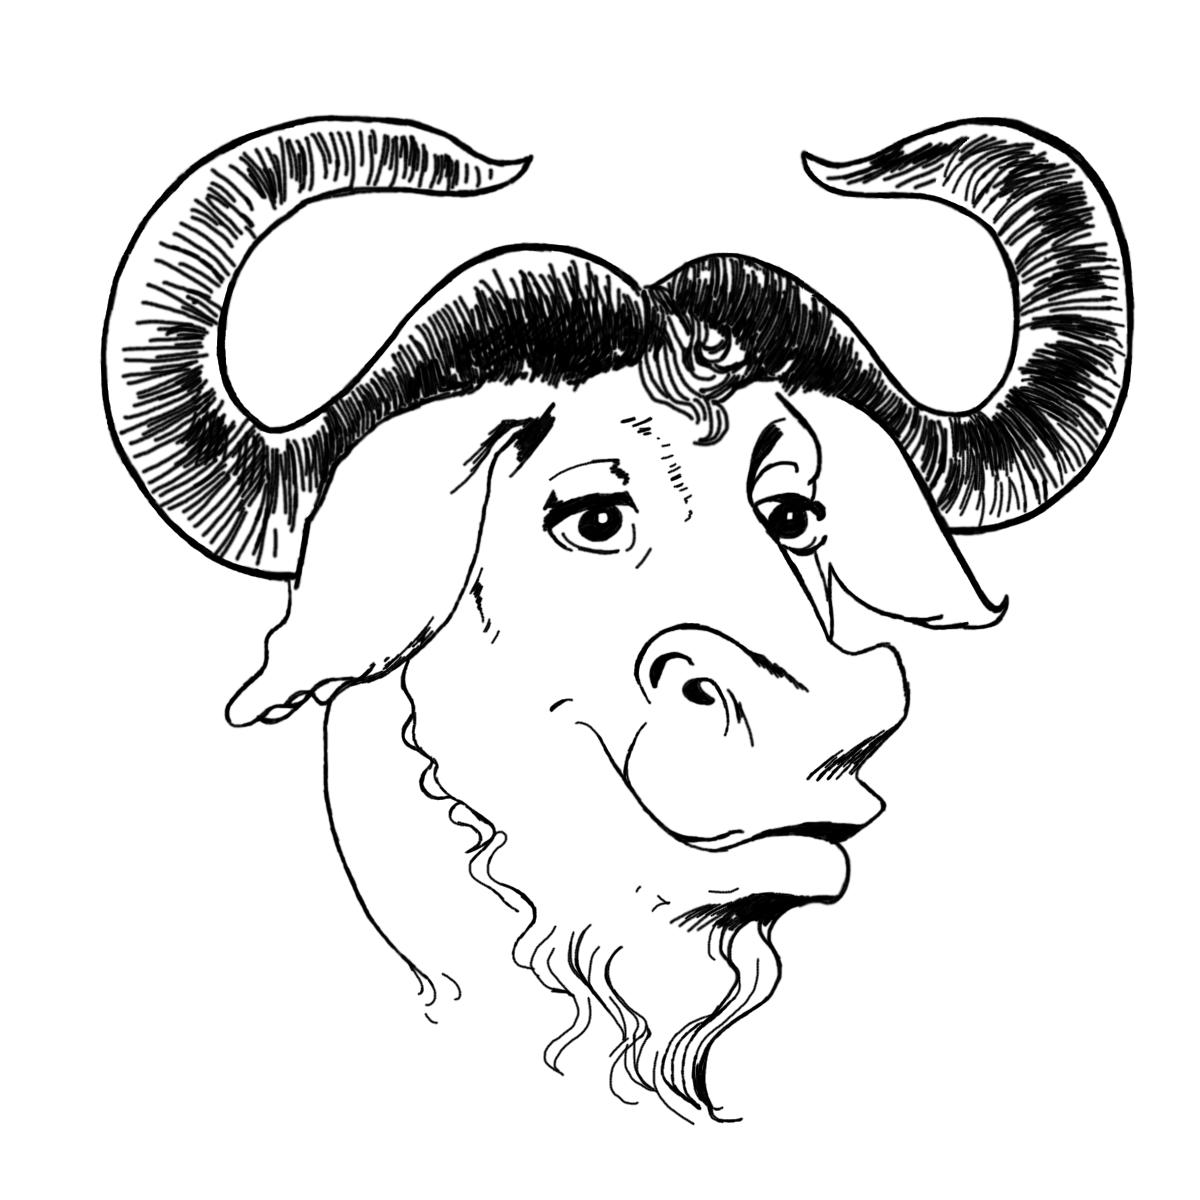 Proxy for gnu.org